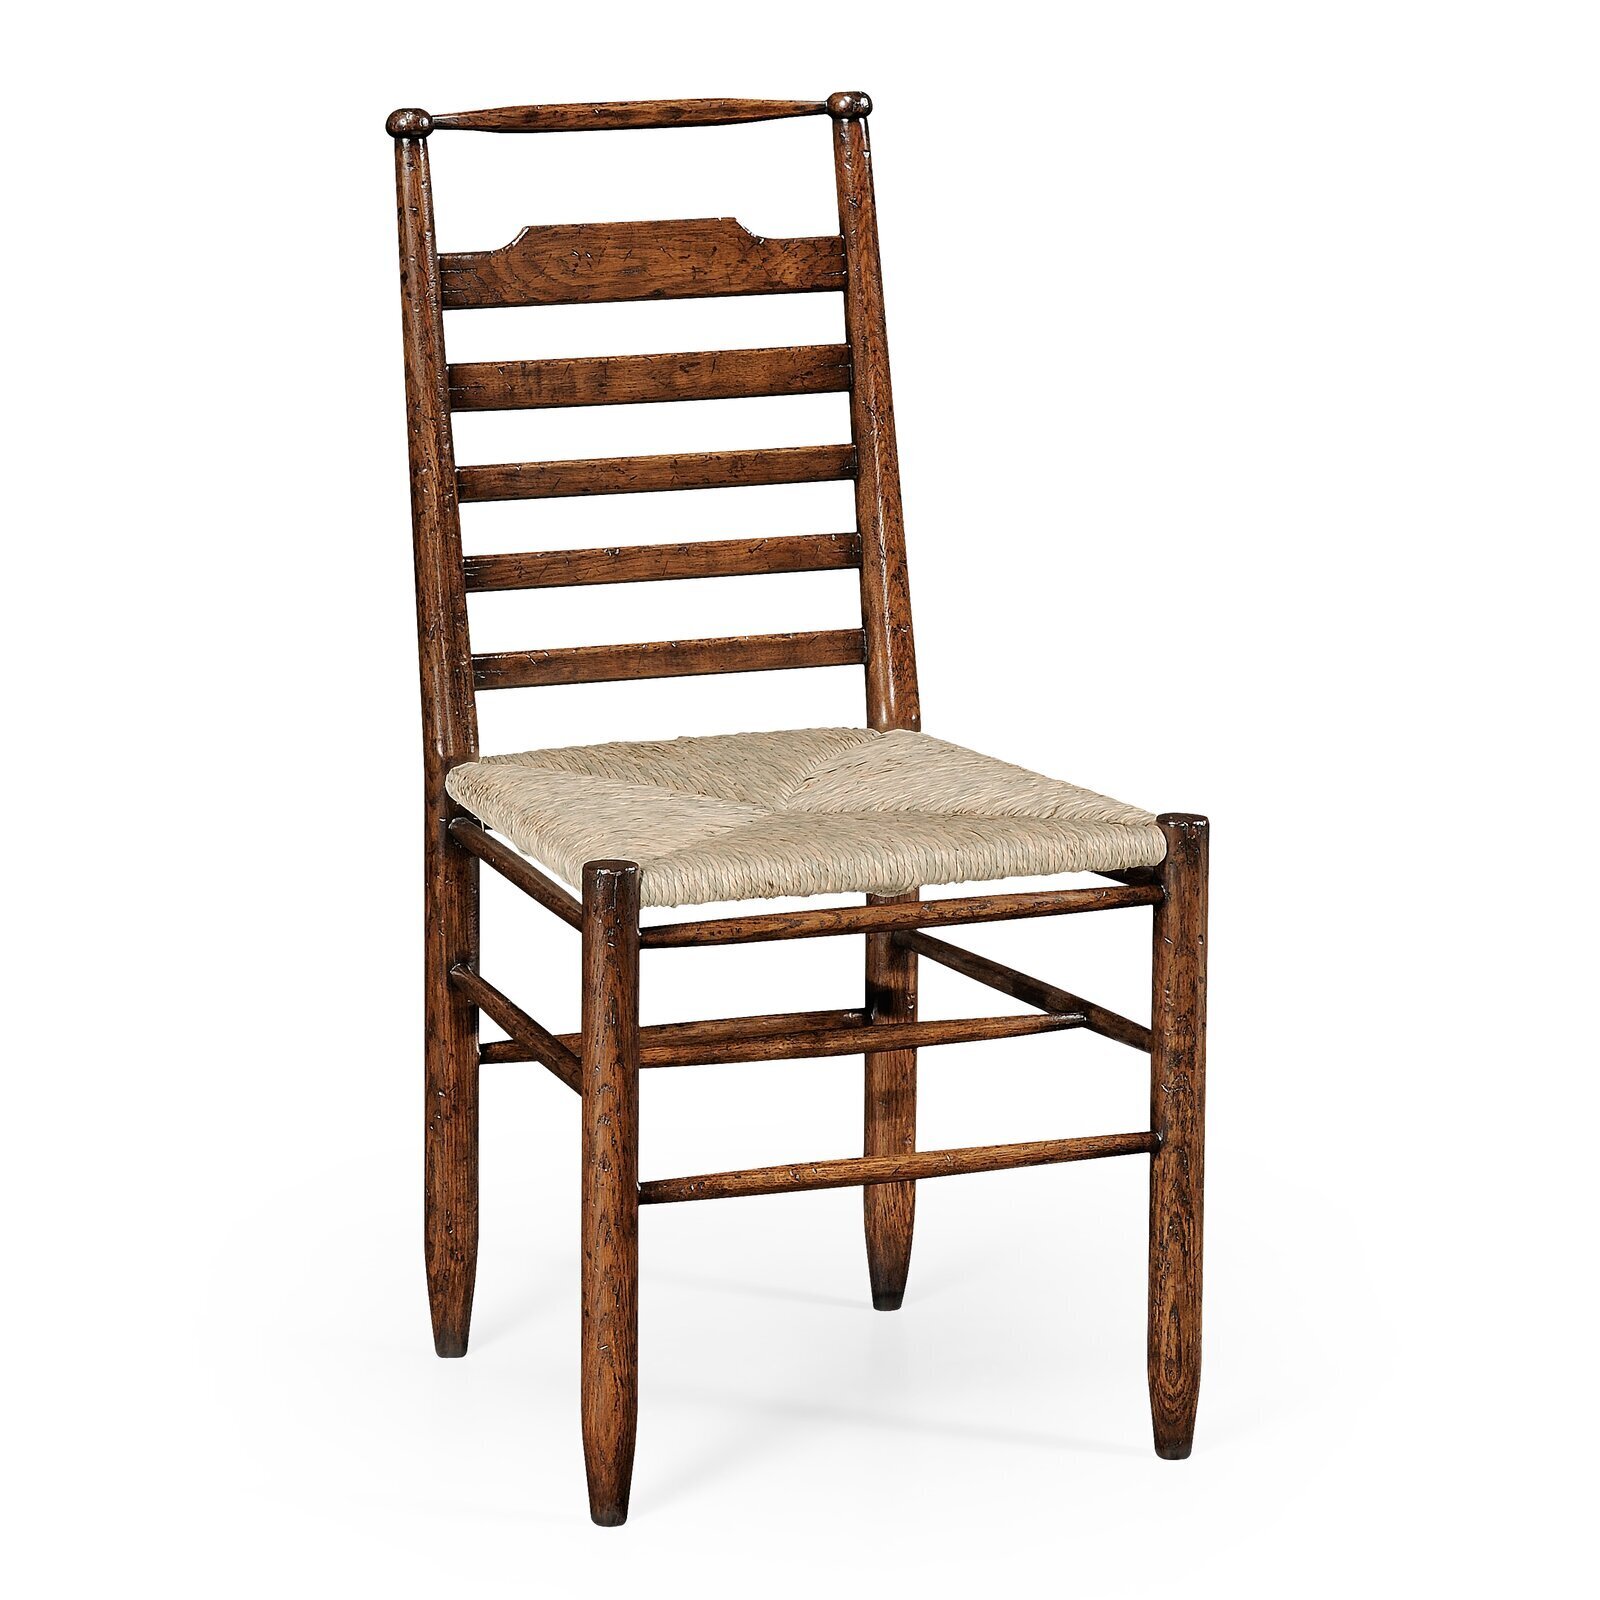 Classic Country Ladder Back Chair with Rush Seats 